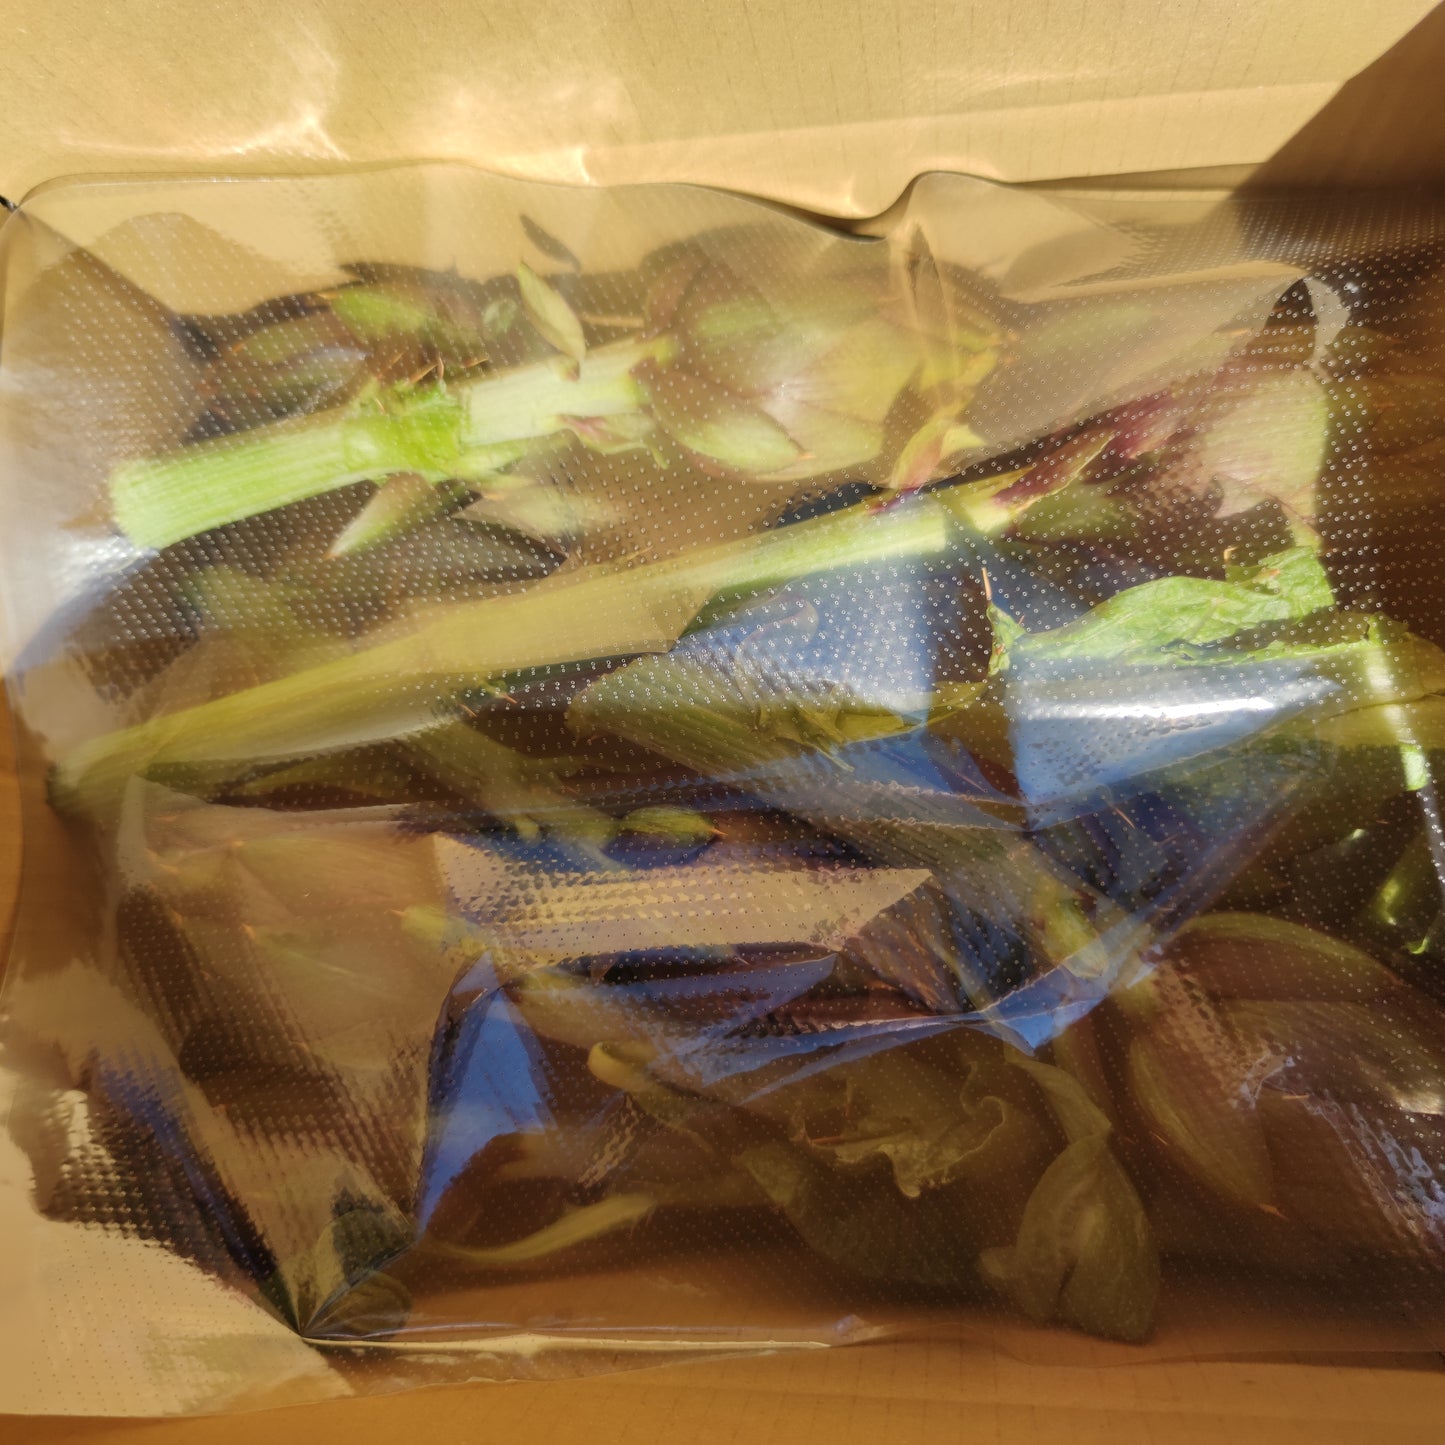 Spiny Sardinian artichoke in a box of 10 pieces